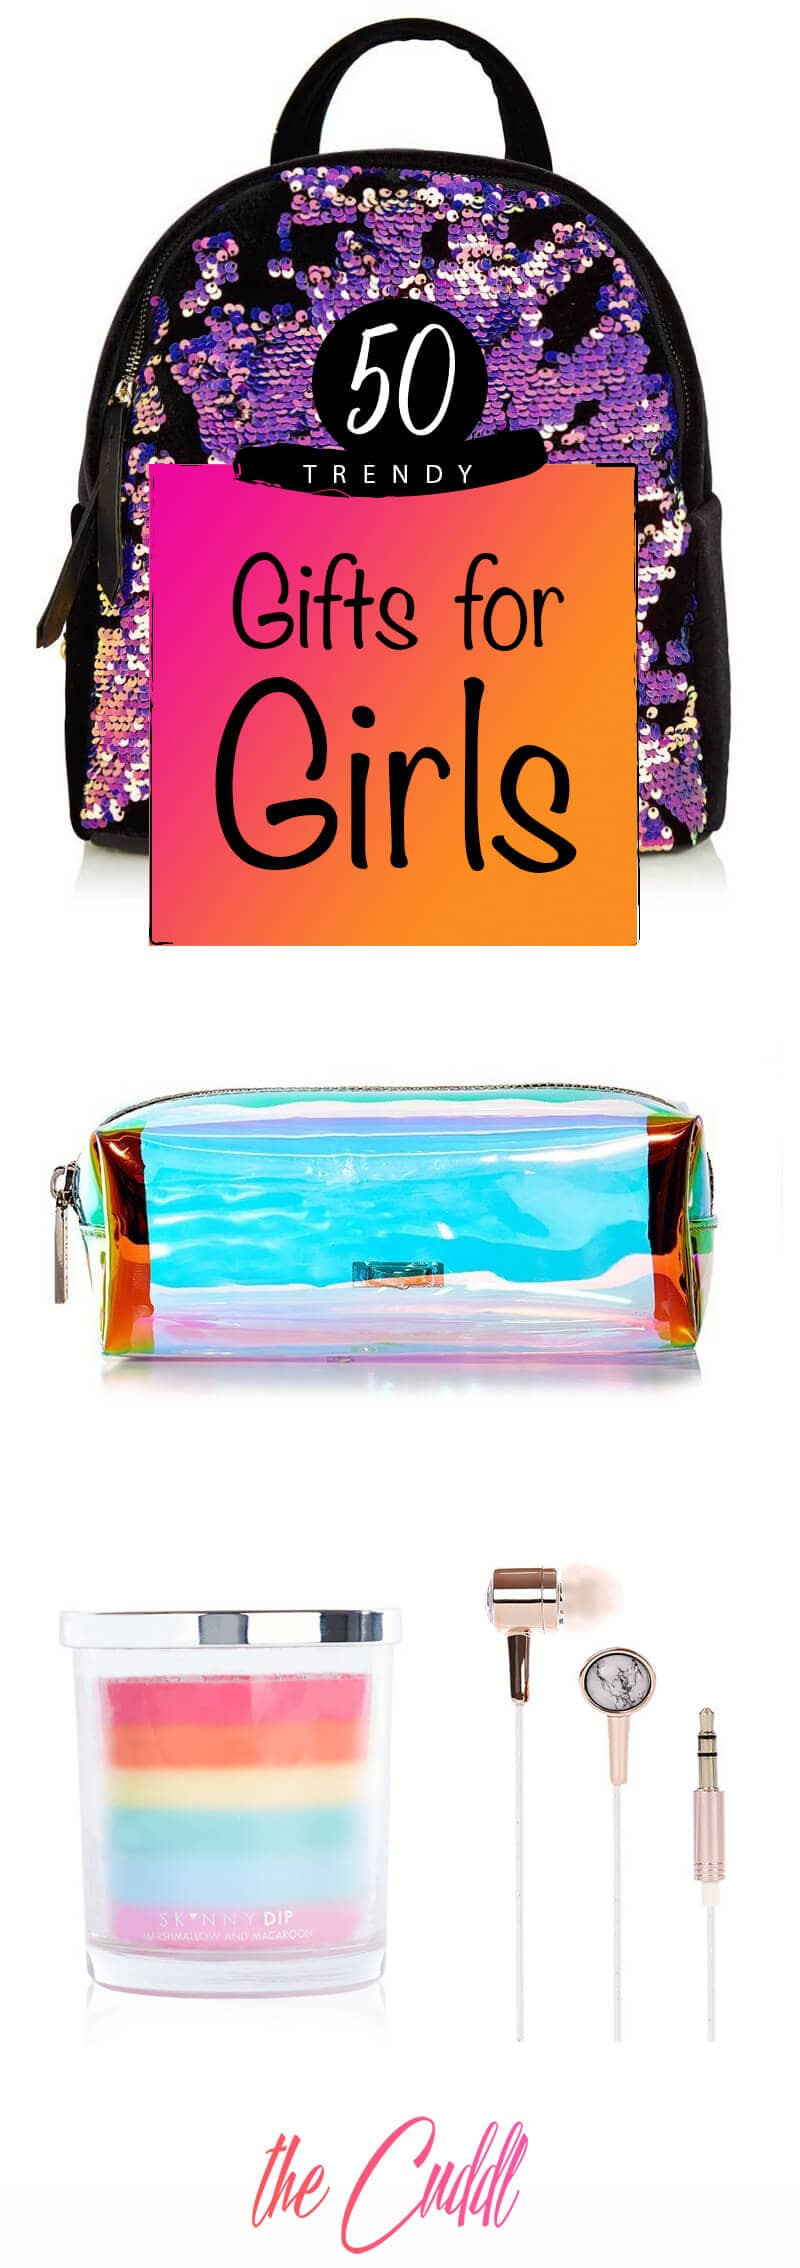 Gift For Girls Ideas
 50 Trendy Gifts for Girls to Make Any Lady’s Day